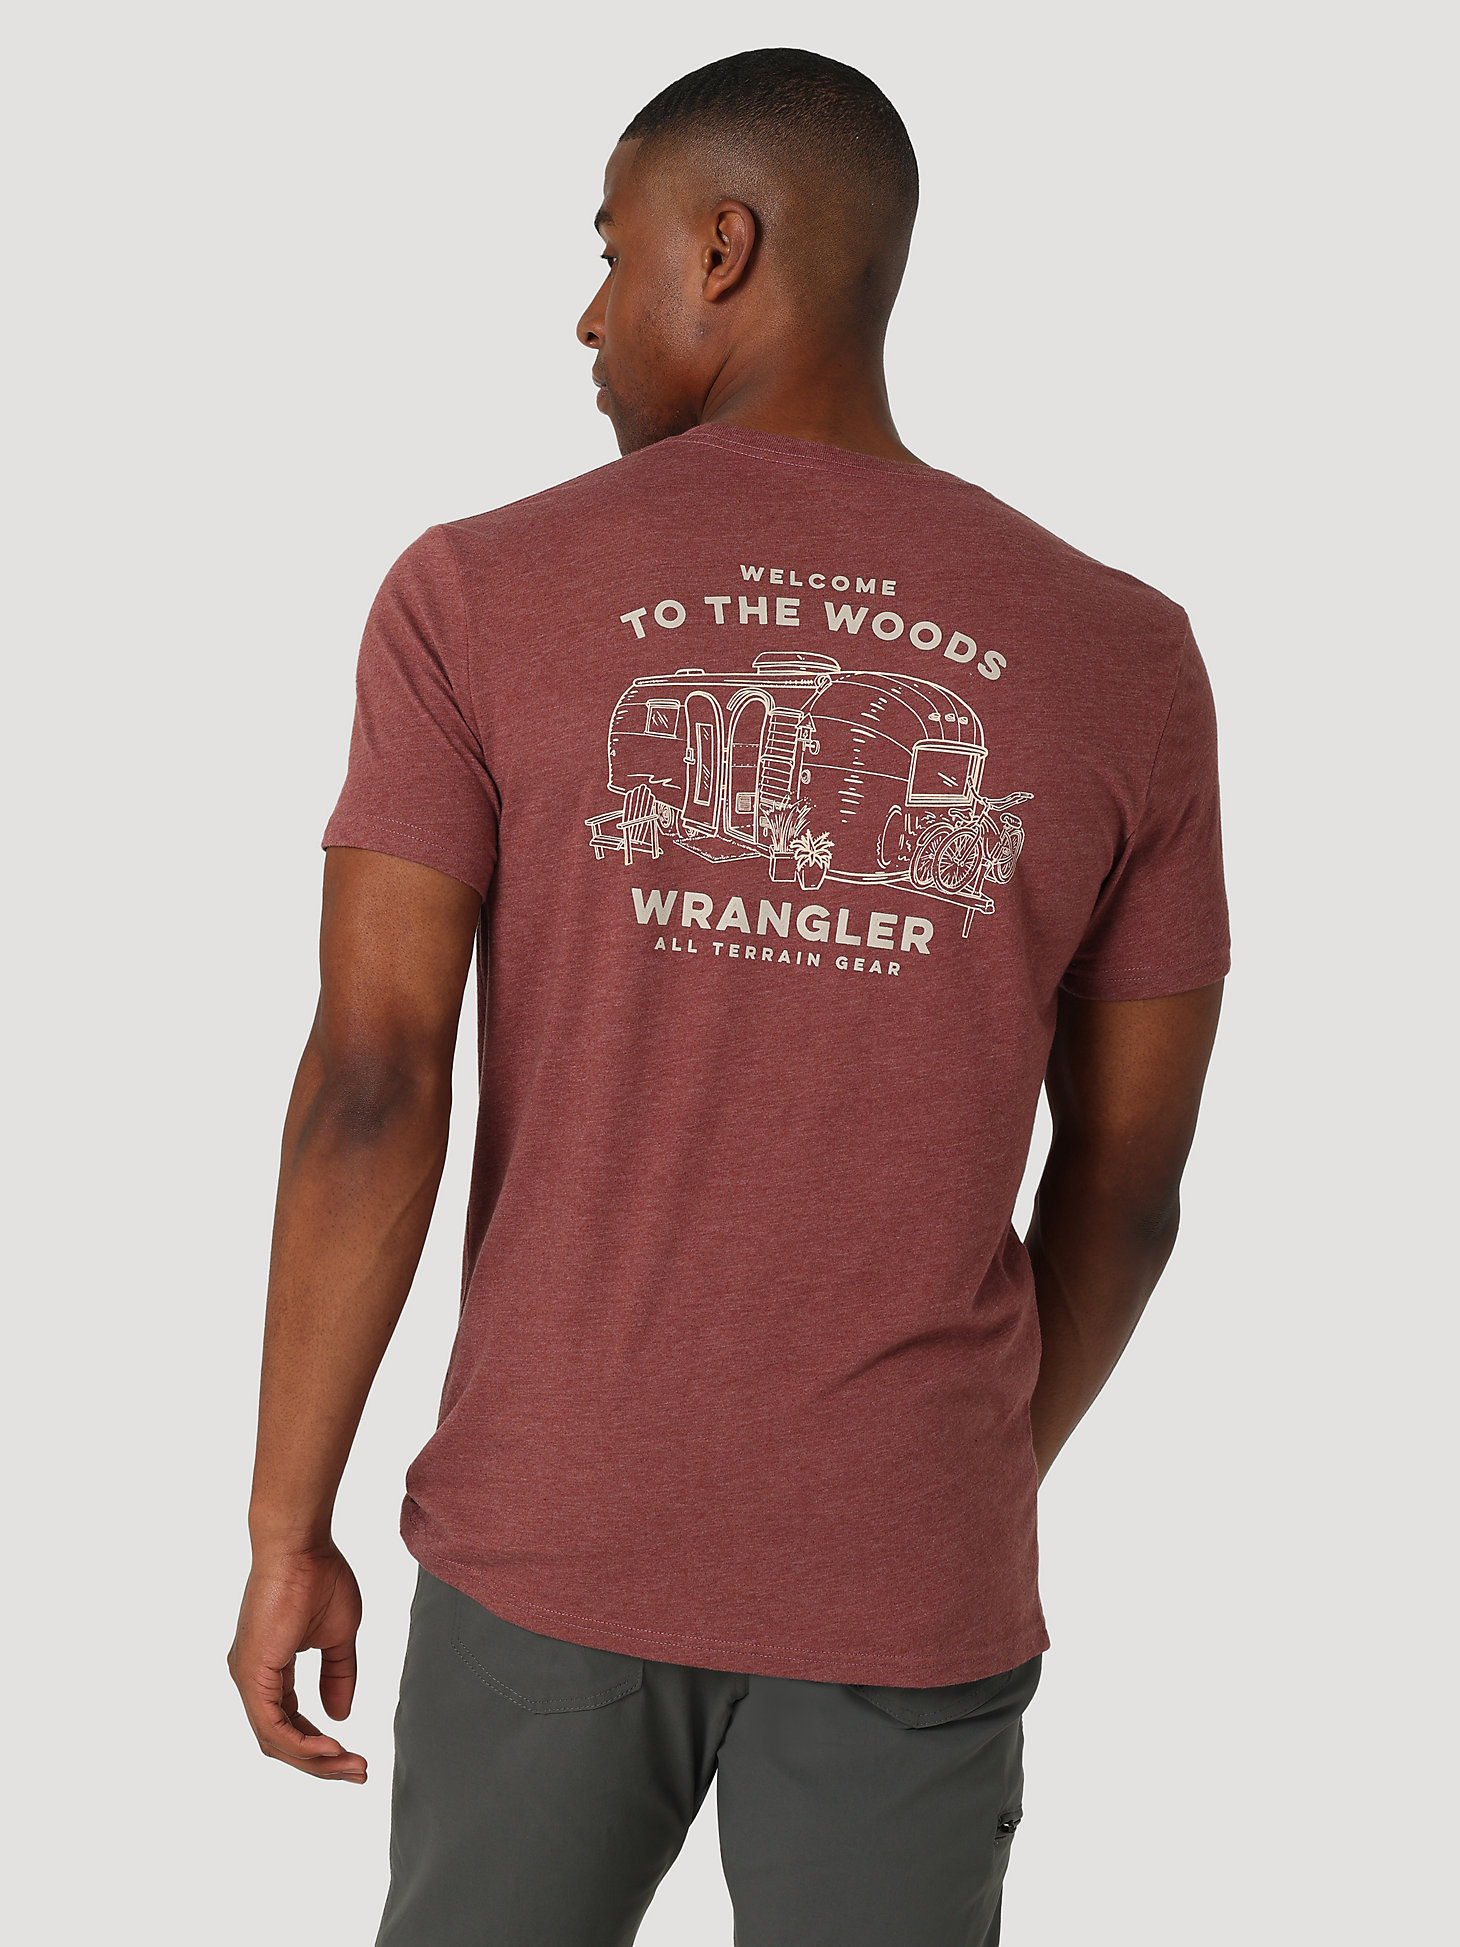 ATG By Wrangler™ Men's Back Graphic T-Shirt in Sable alternative view 1